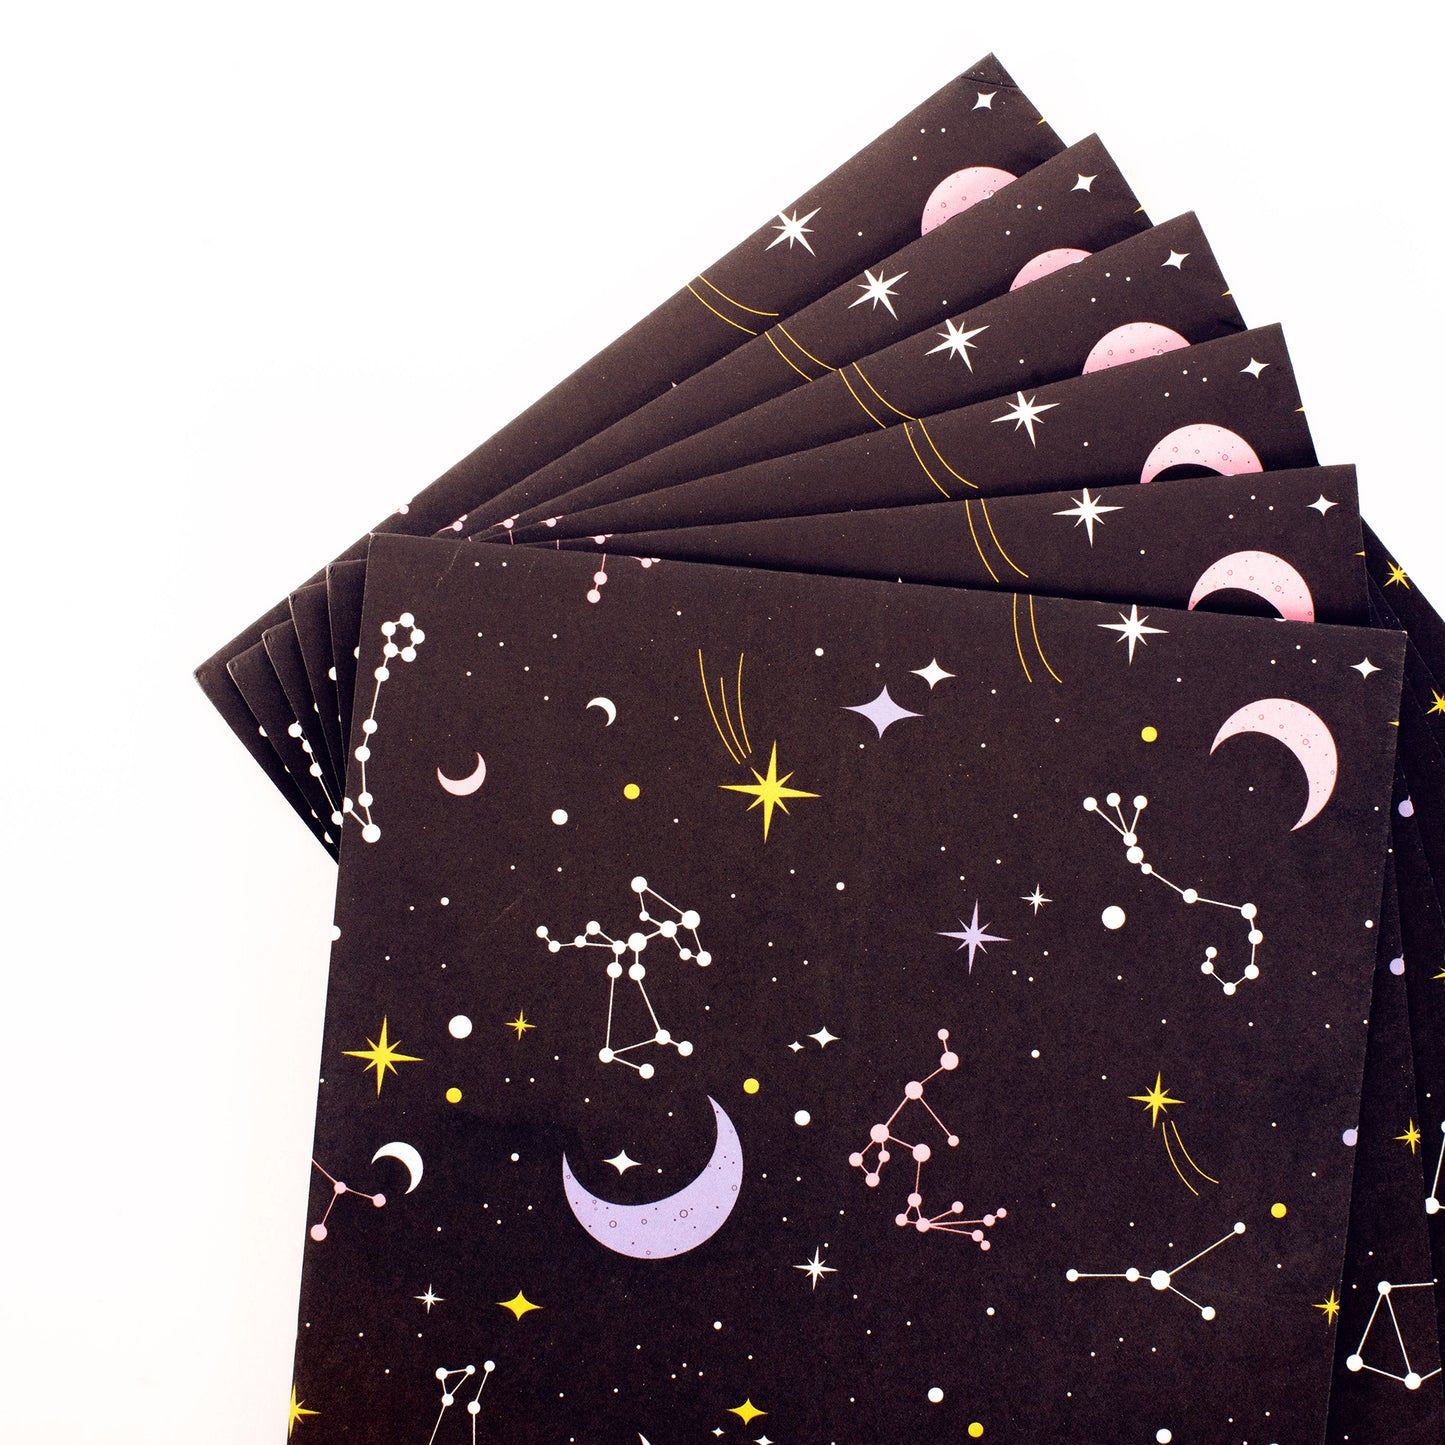 Constellation Wrapping Paper - 6 Sheets of Gift Wrap - 'Constellations' - Black Gift Wrap - For Men Women Him Her Boys Girls Kids